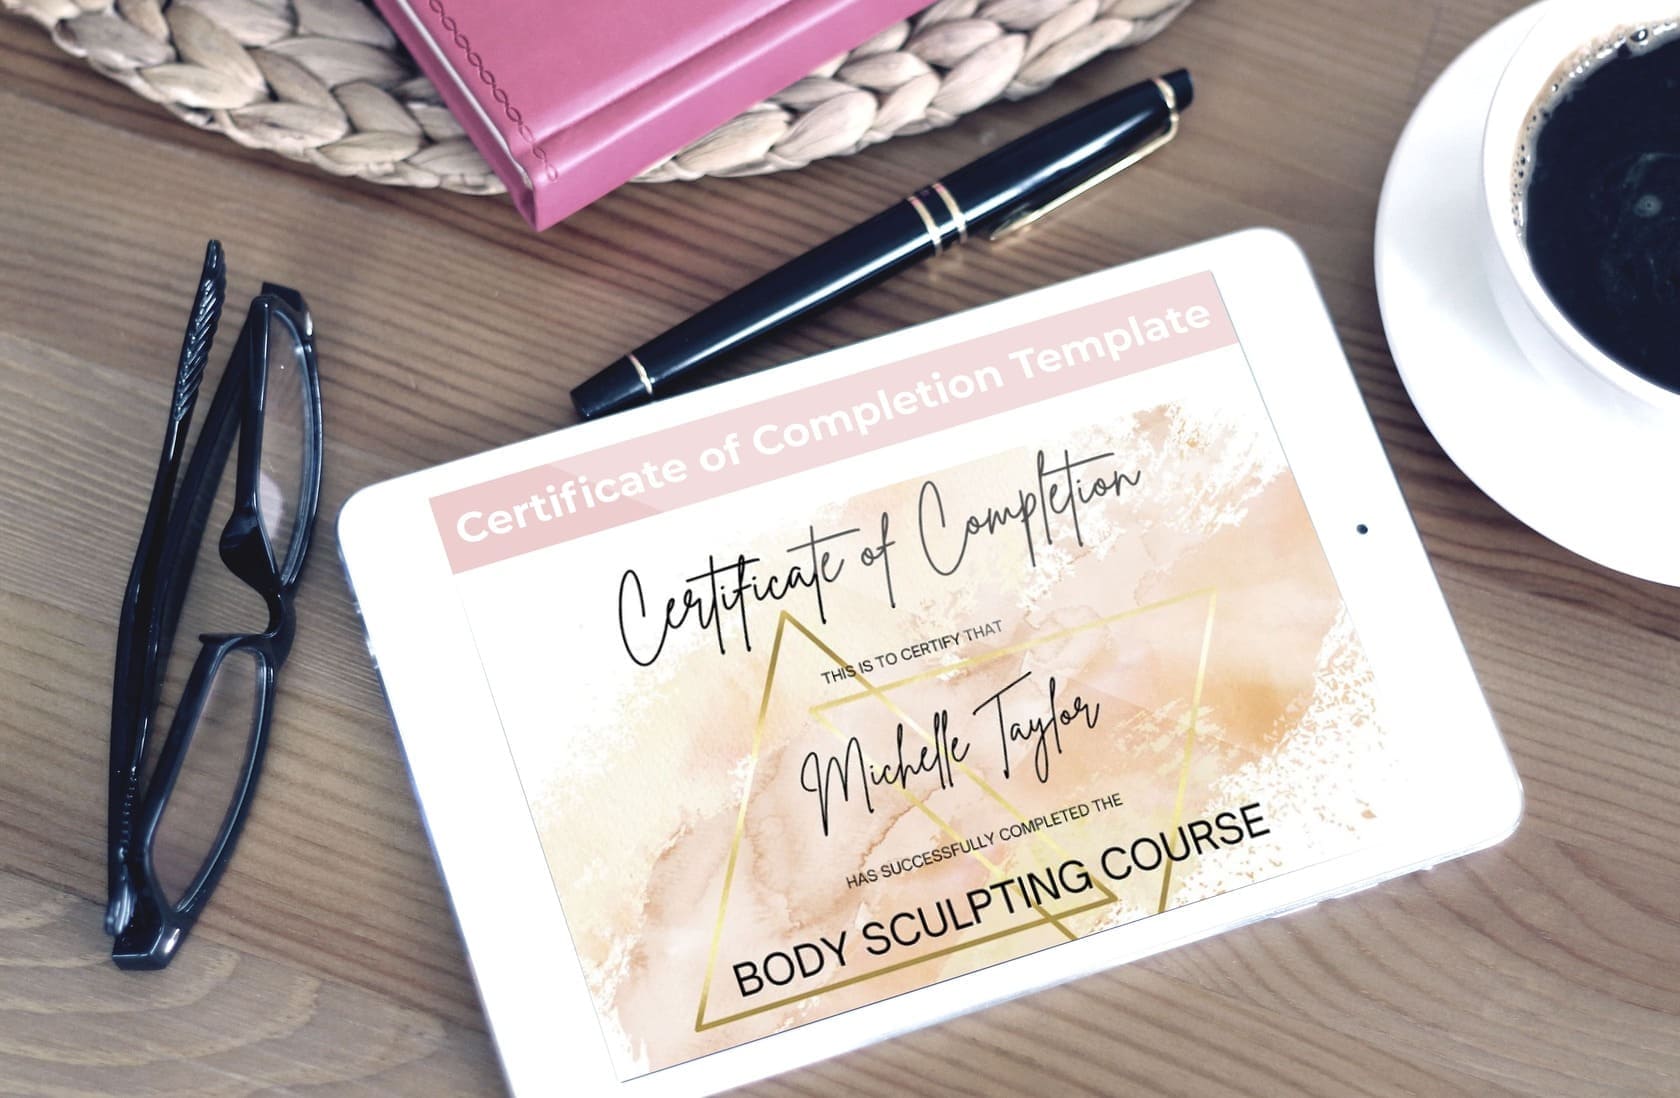 Certificate Of Completion Template - Body Sculpting Course On The Tablet, Which Lying Around The Glasses, Coffee, Pen And Notebook..